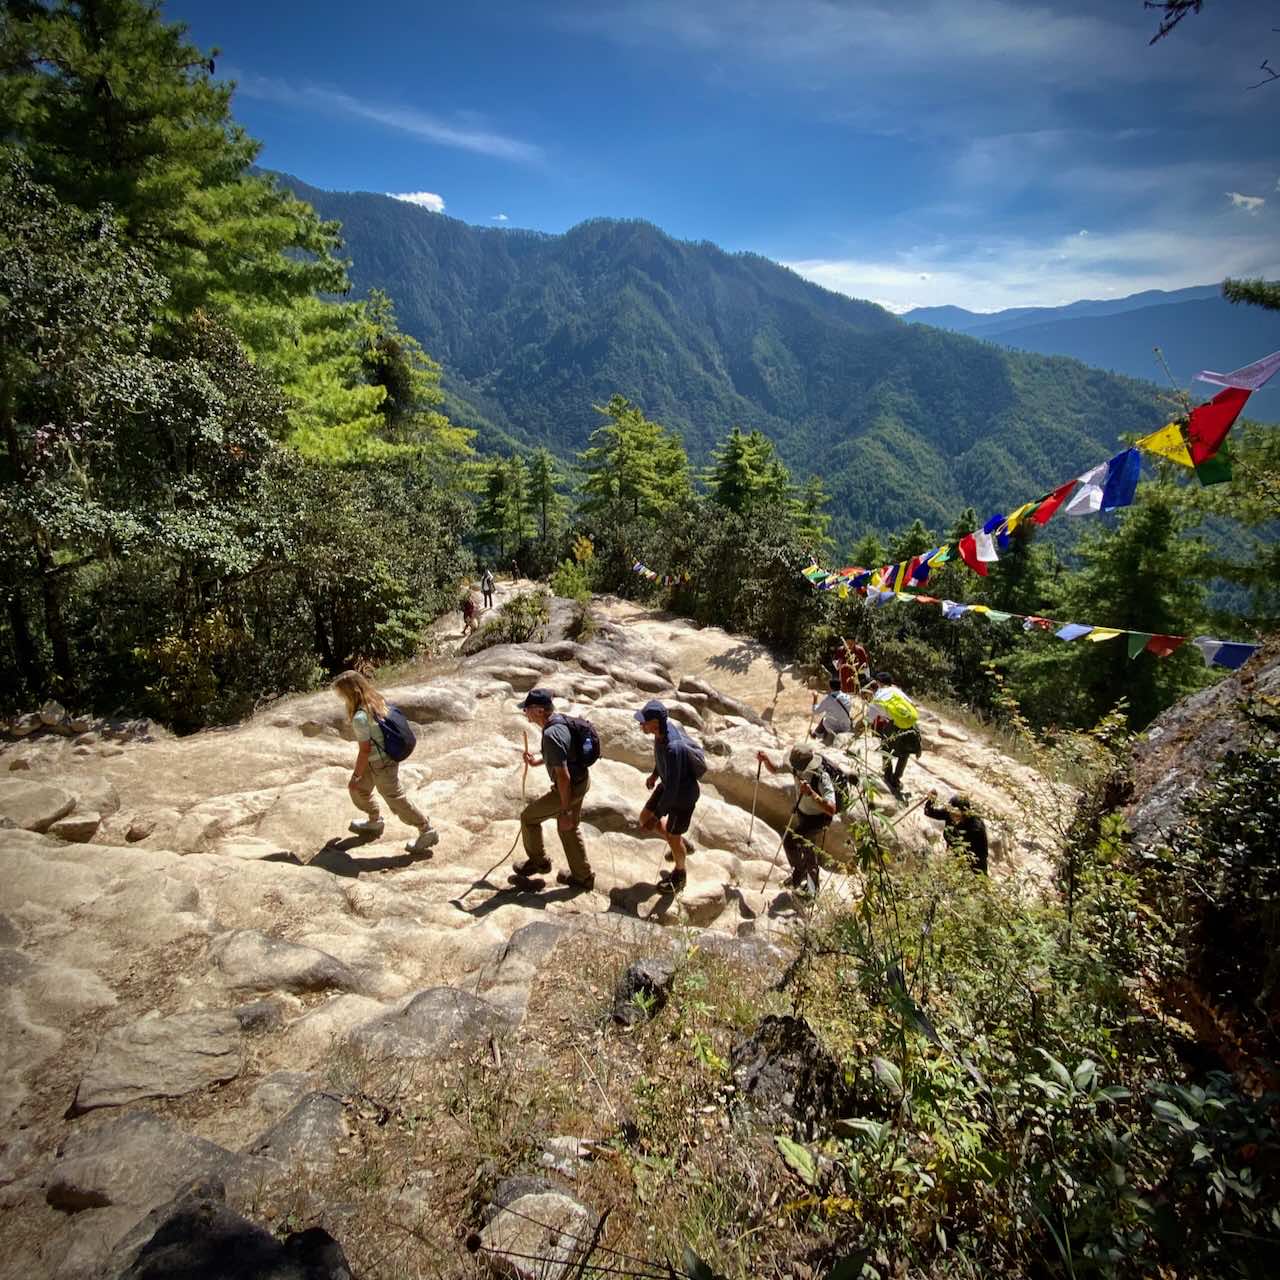 Cyclists treking to Tiger's Nest as part of a cycling holiday in Bhutan